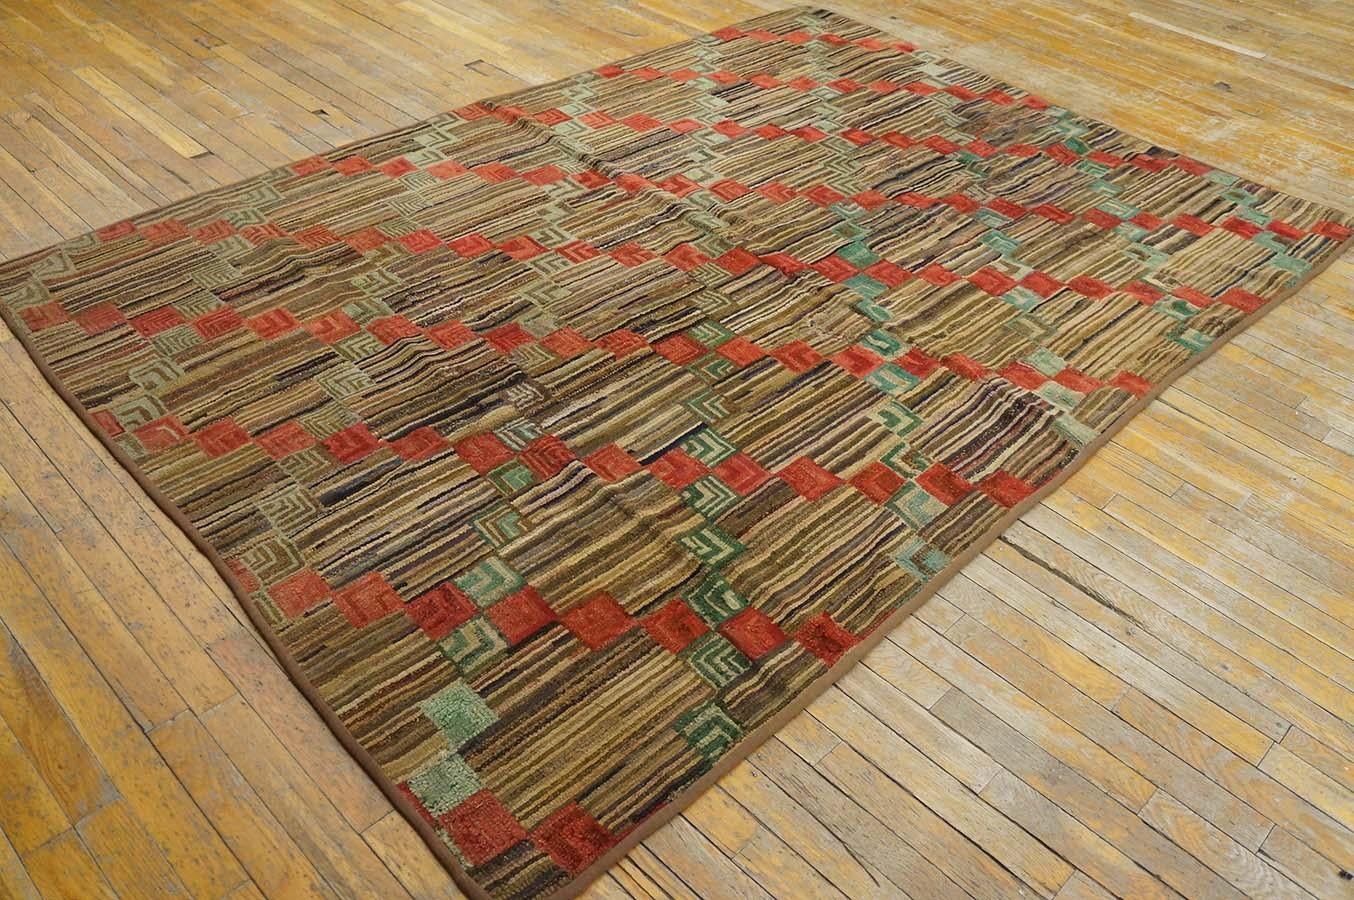 Antique American Hooked rug, size: 5'9